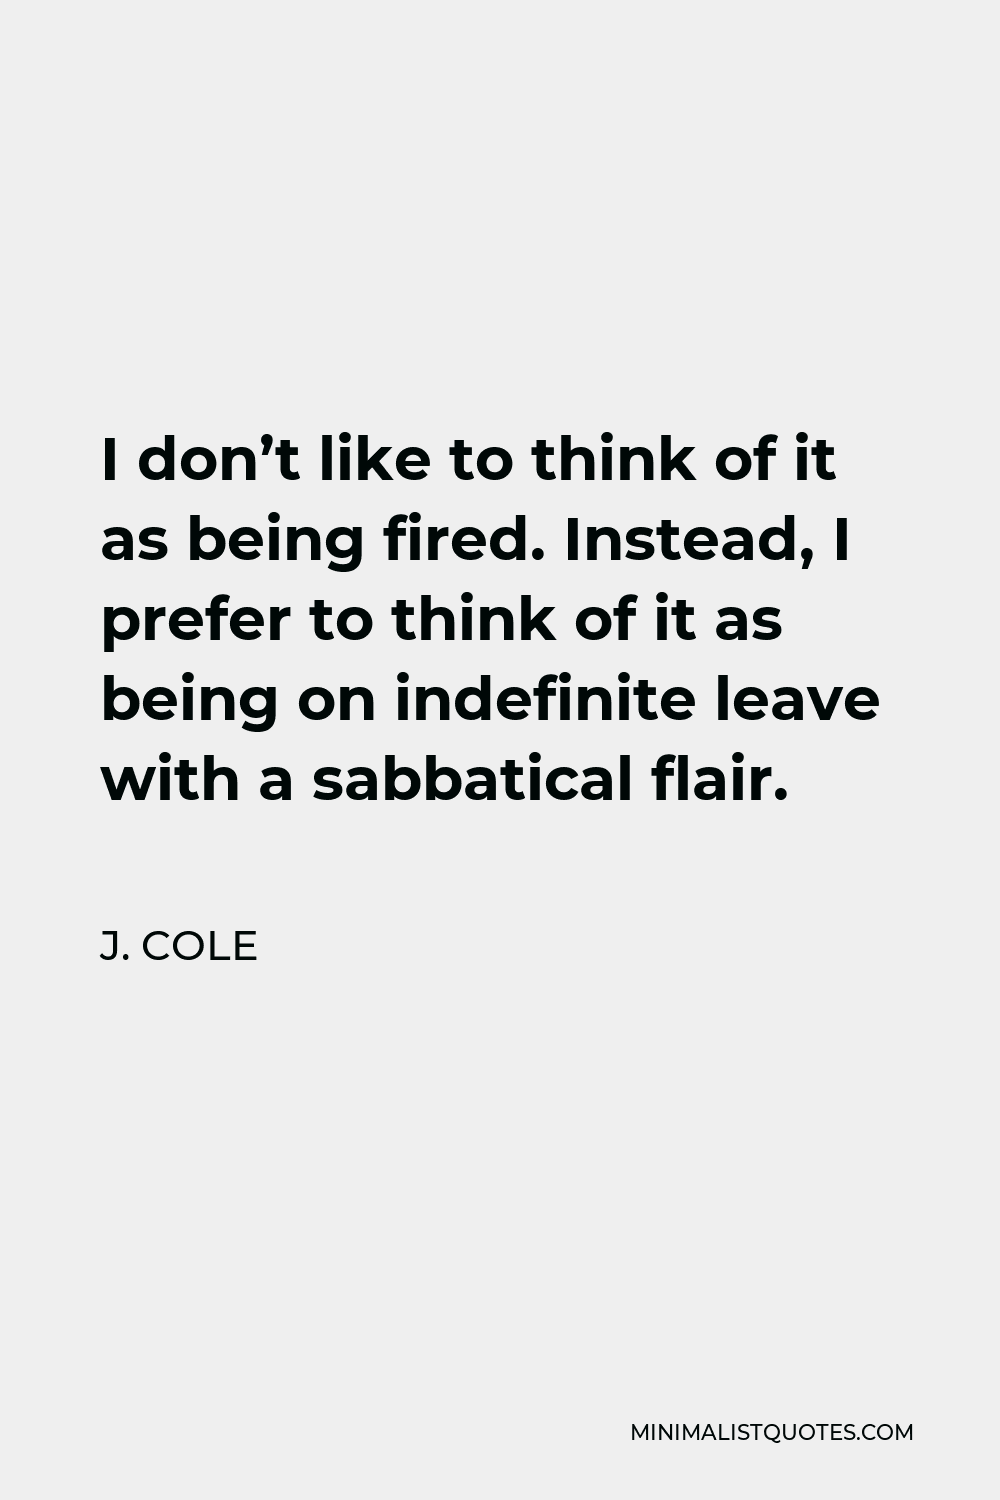 J. Cole Quote - I don’t like to think of it as being fired. Instead, I prefer to think of it as being on indefinite leave with a sabbatical flair.